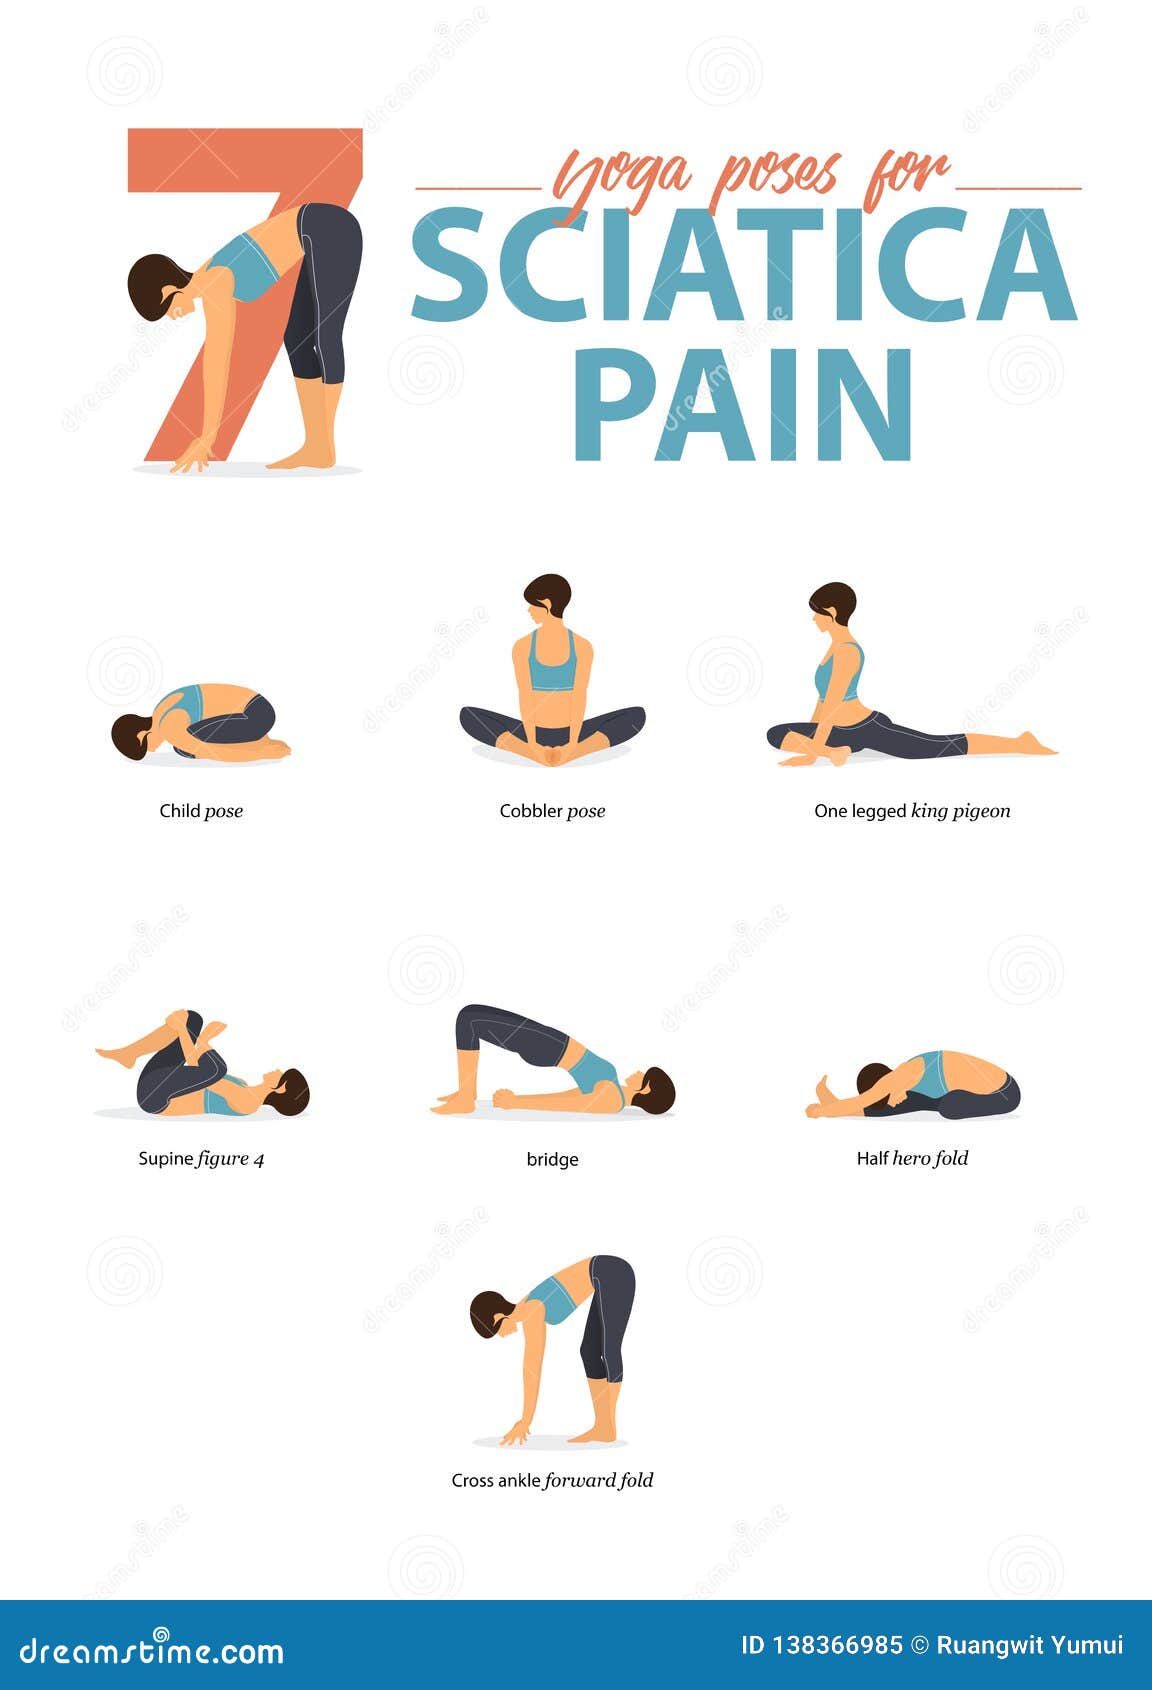 3 Easy Hamstring Stretches for Sciatica Pain Relief Infographic |  Sports-health